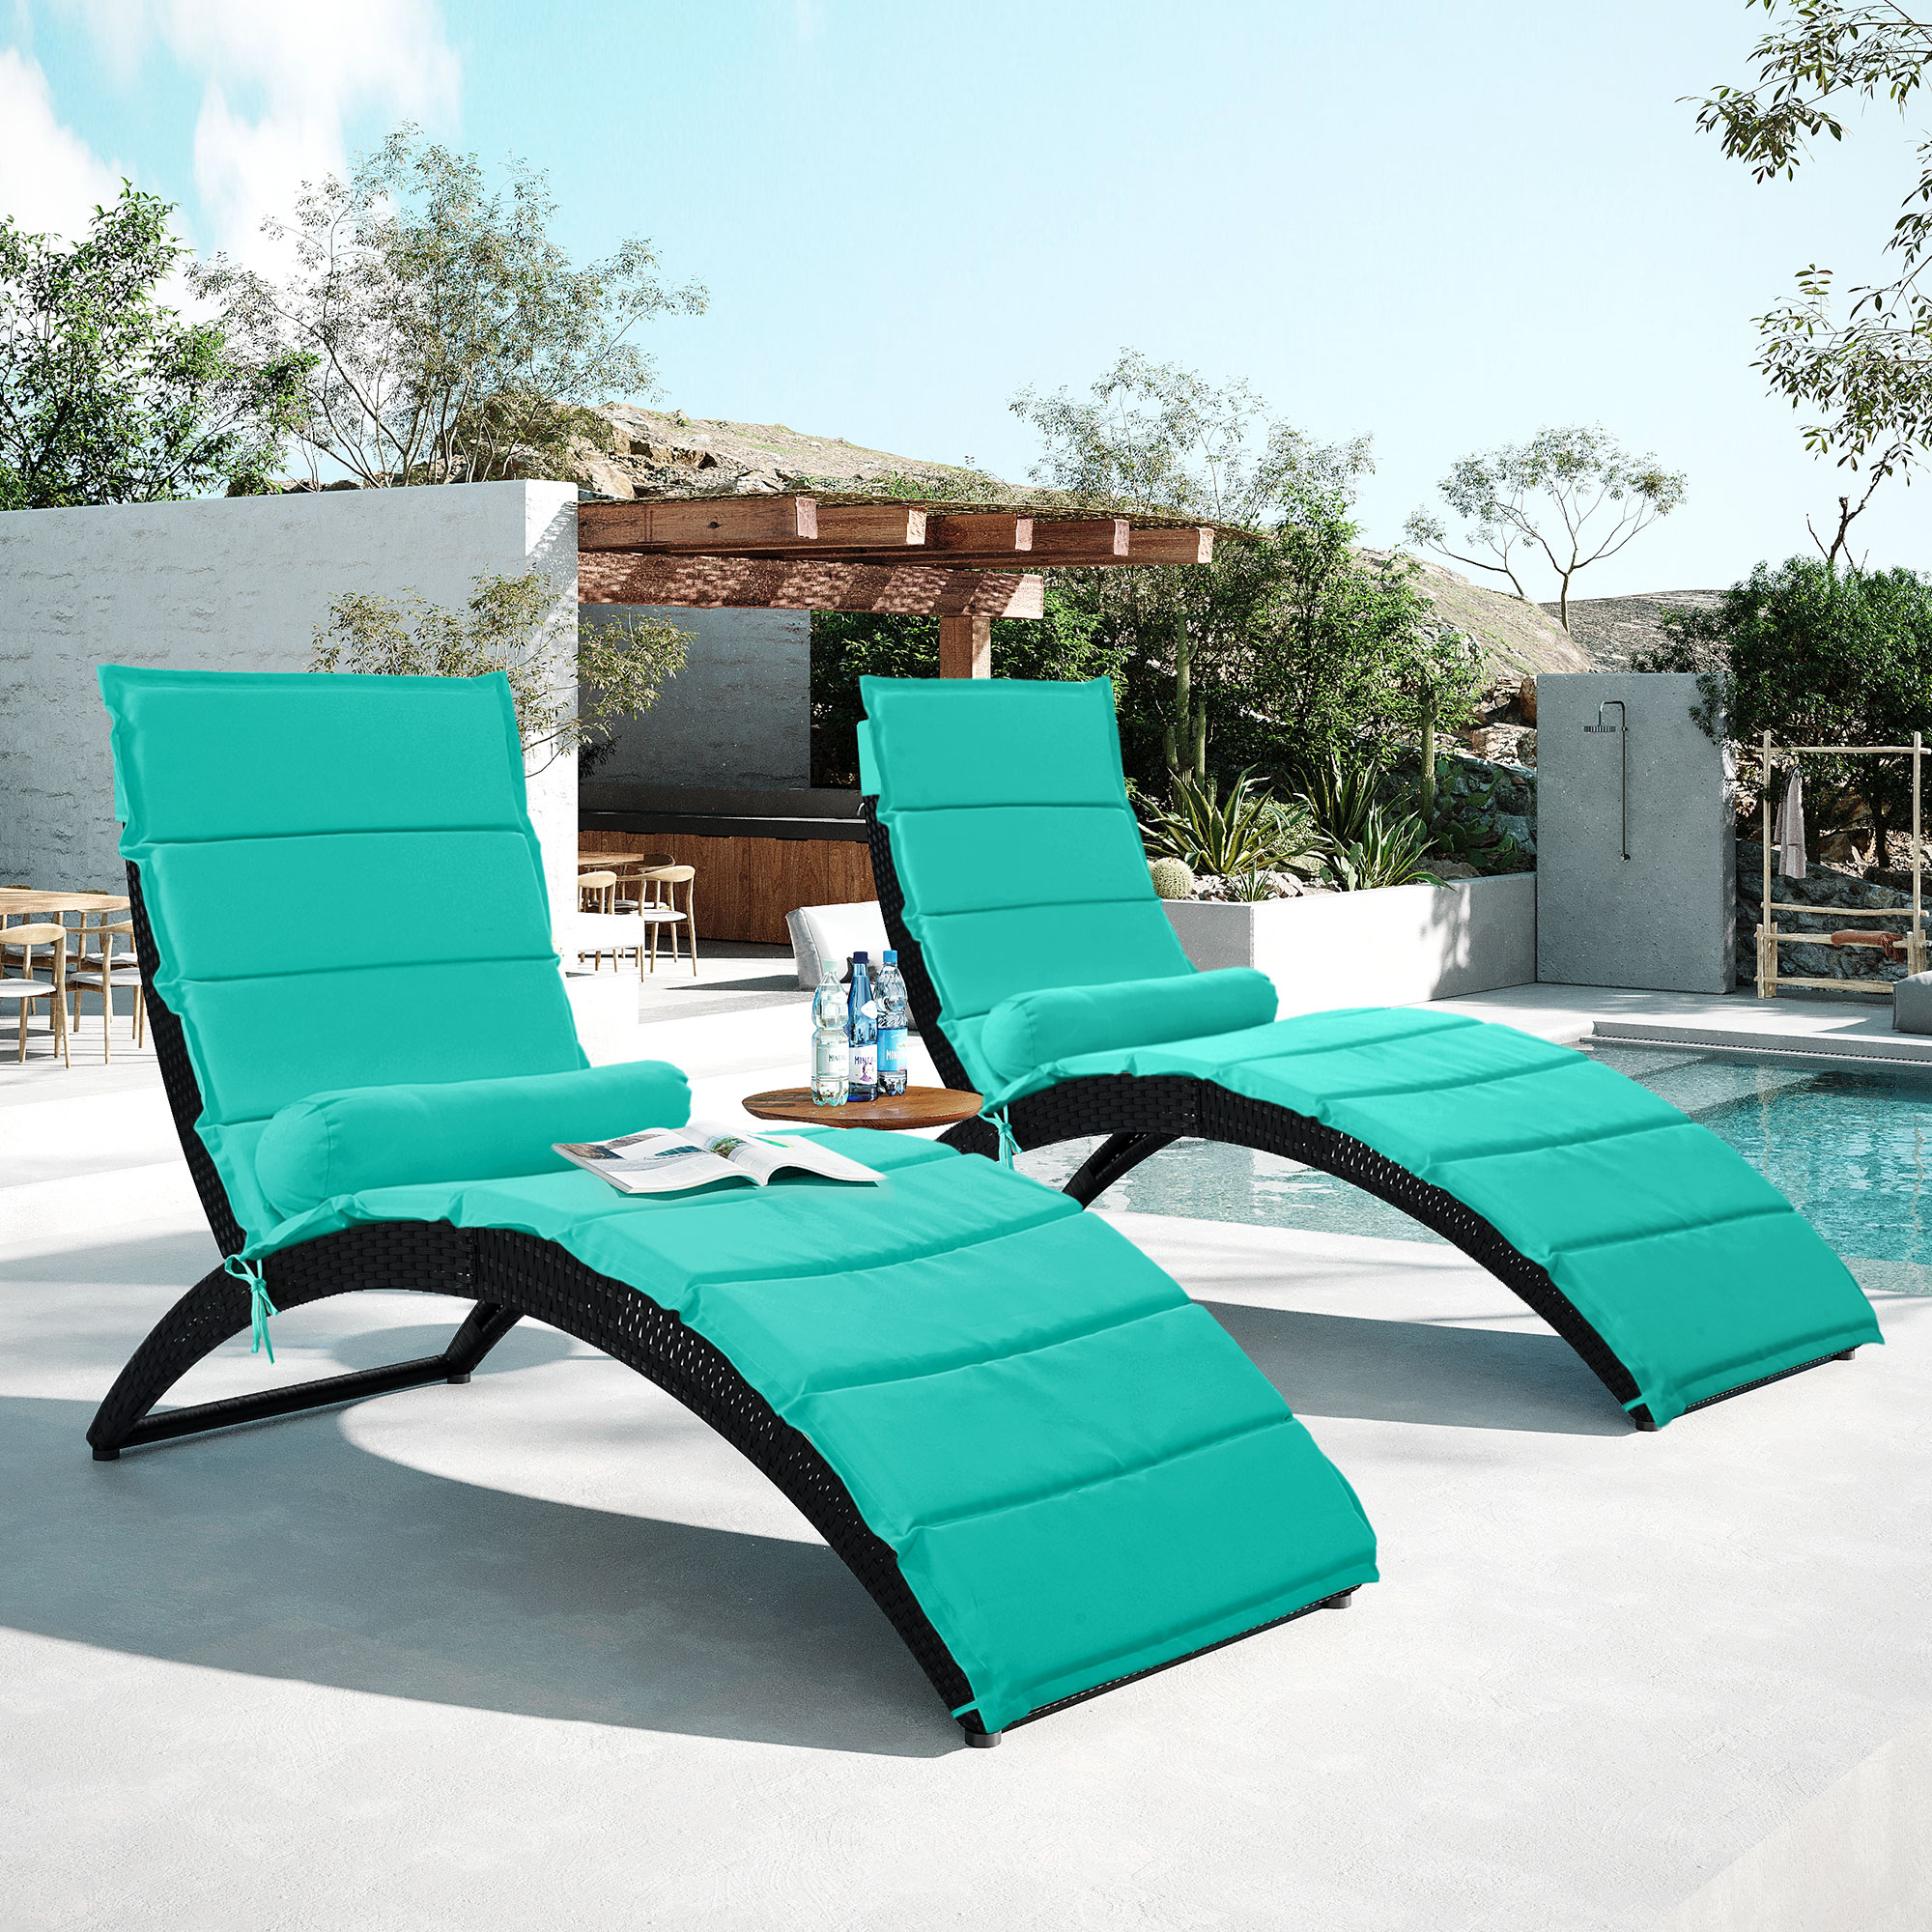 Patio Chaise Lounge Chairs Set of 2, PE Wicker Adjustable Reclining Chairs, Outdoor Rattan Chaise Chairs, Cushioned Sun Lounger for Outside, Poolside, Garden, Backyard, Blue, D6390 - image 2 of 10